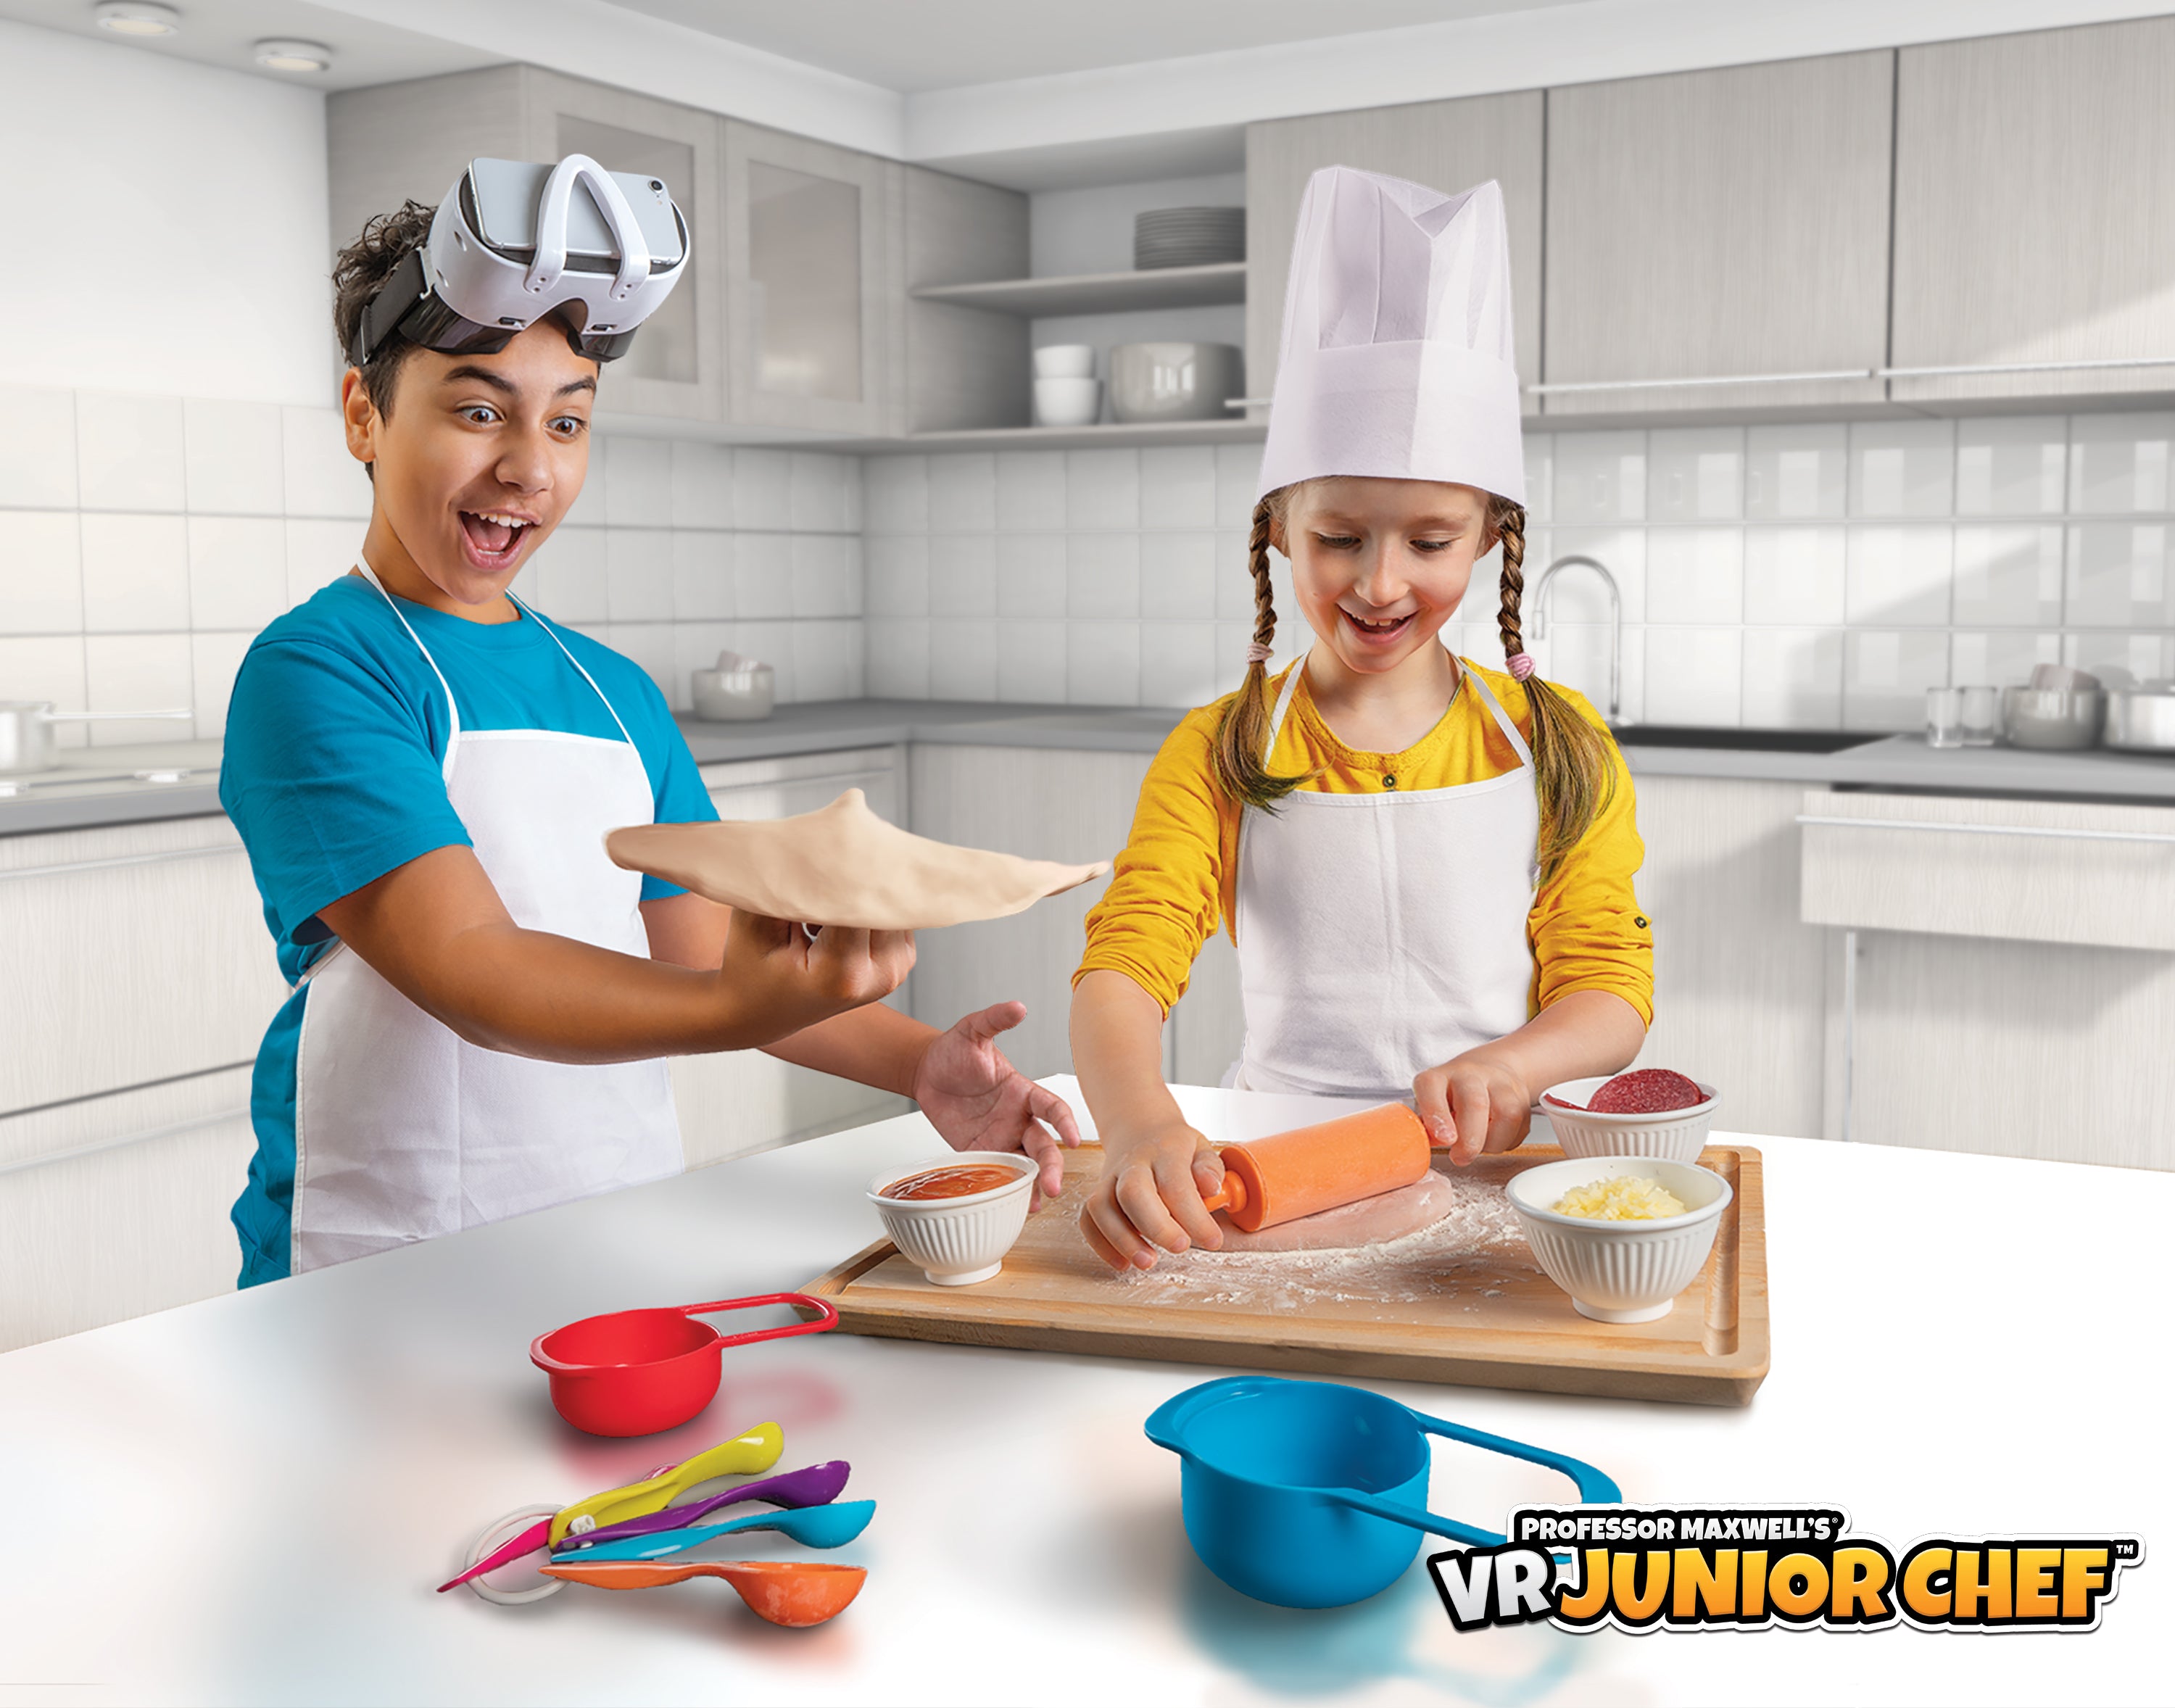 Professor Maxwell's Virtual Reality Cooking Kit for Kids - VR Junior Chef | Educational Food Science Kit